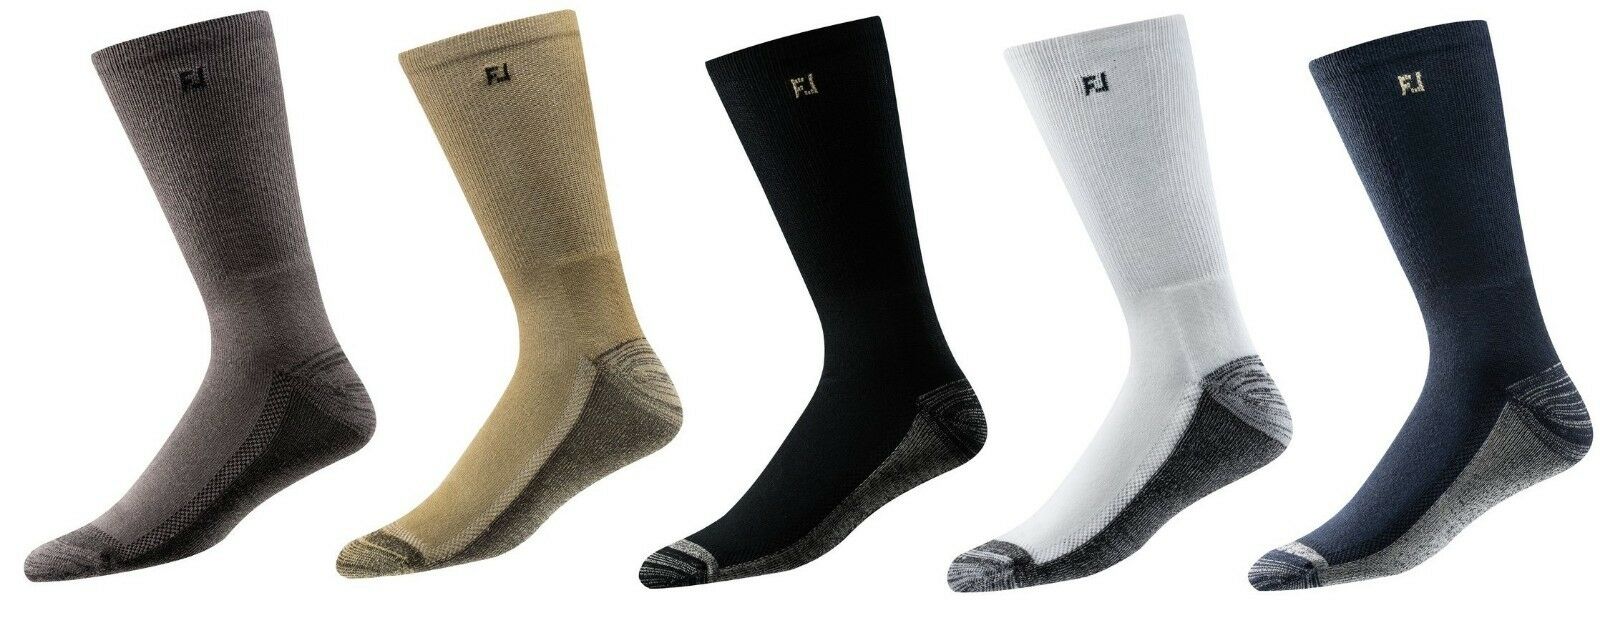 New Mens Footjoy Prodry Crew Solid Golf Socks, Pick A Color, One Pair, Size 7-12